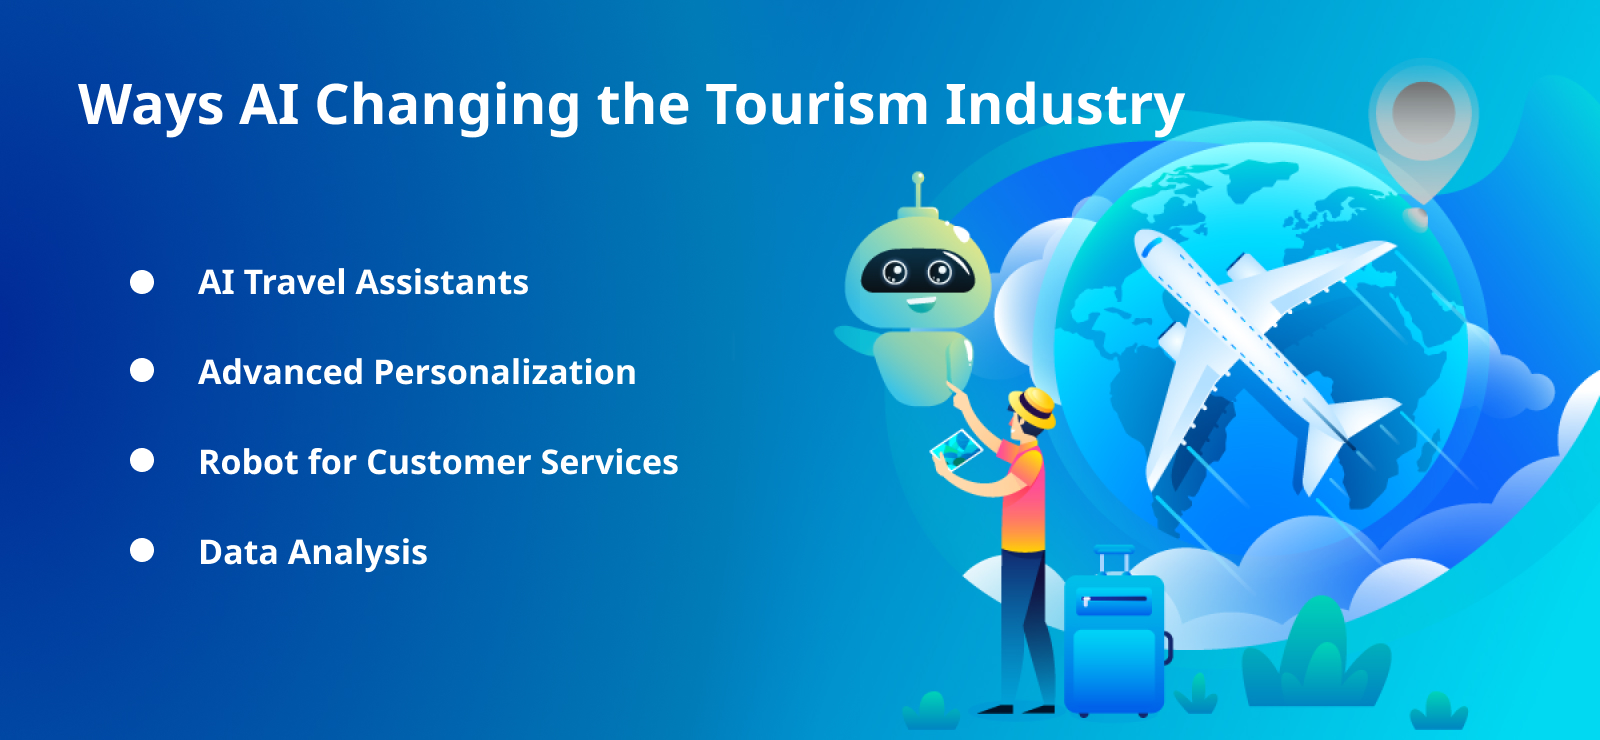 Ways AI Changing the Tourism Industry